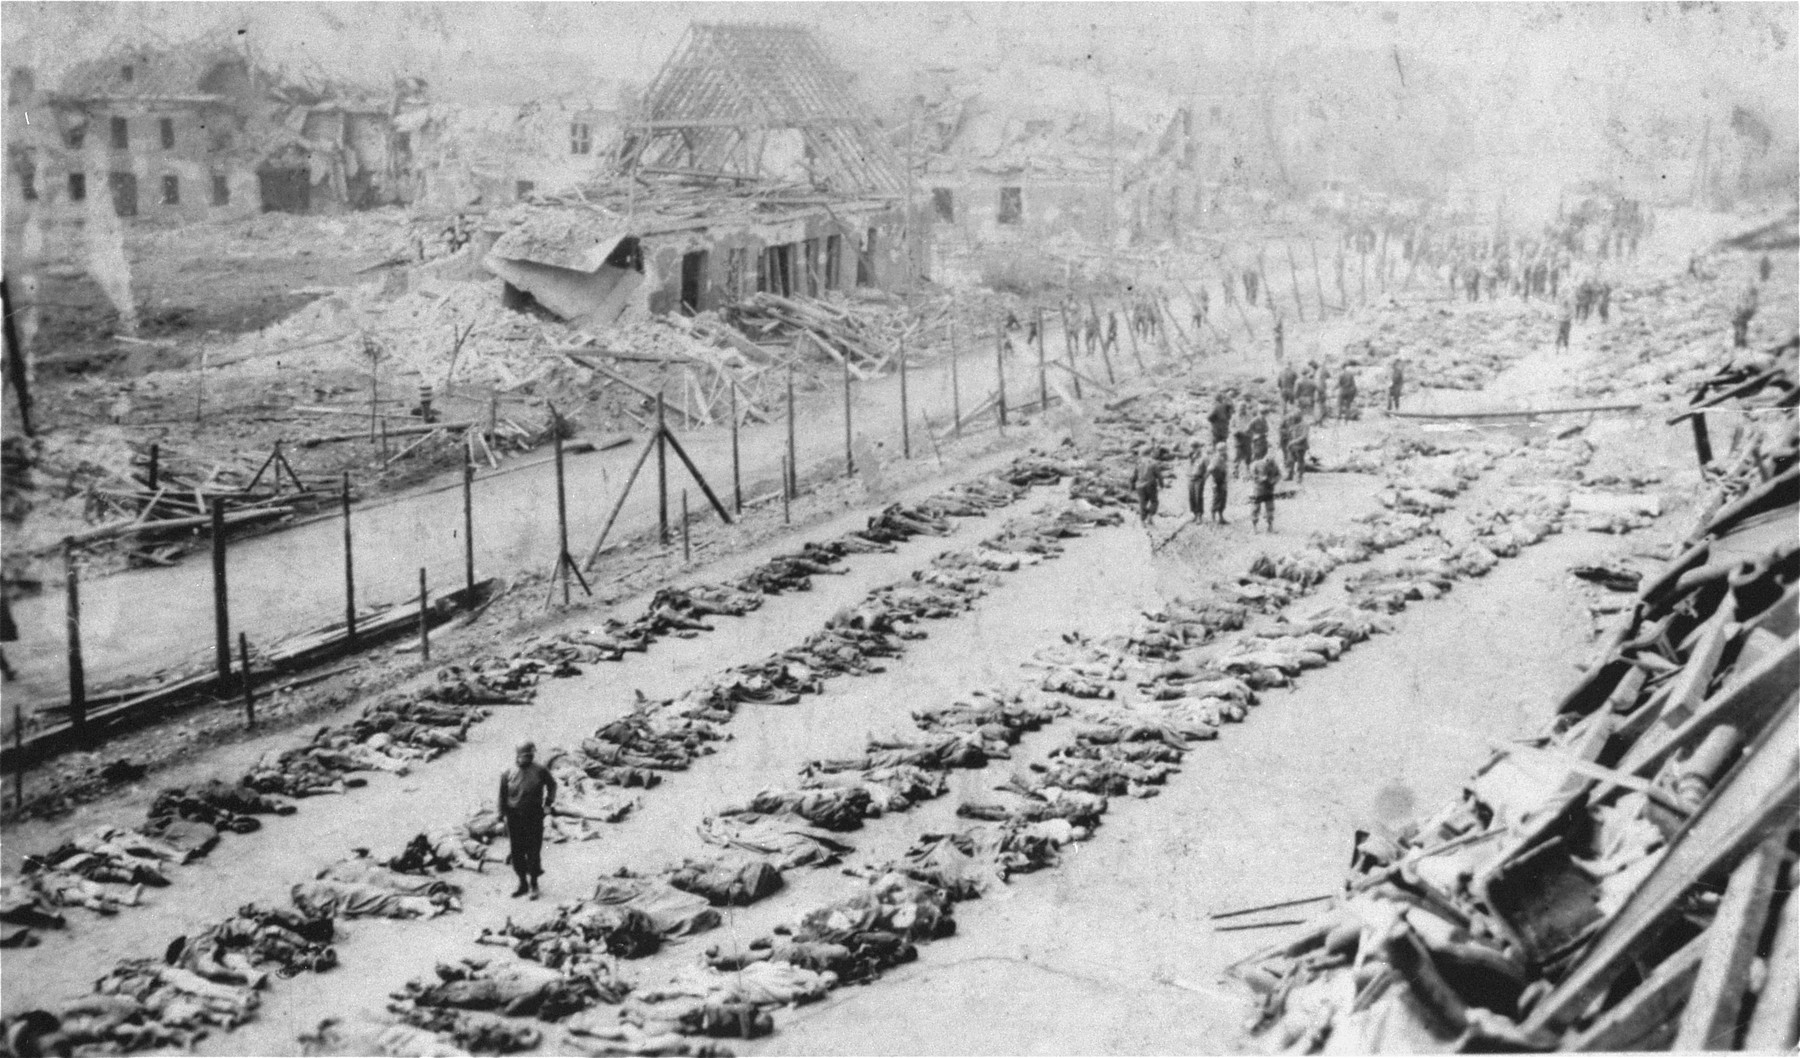 American soldiers walk among rows of corpses in the Nordhausen